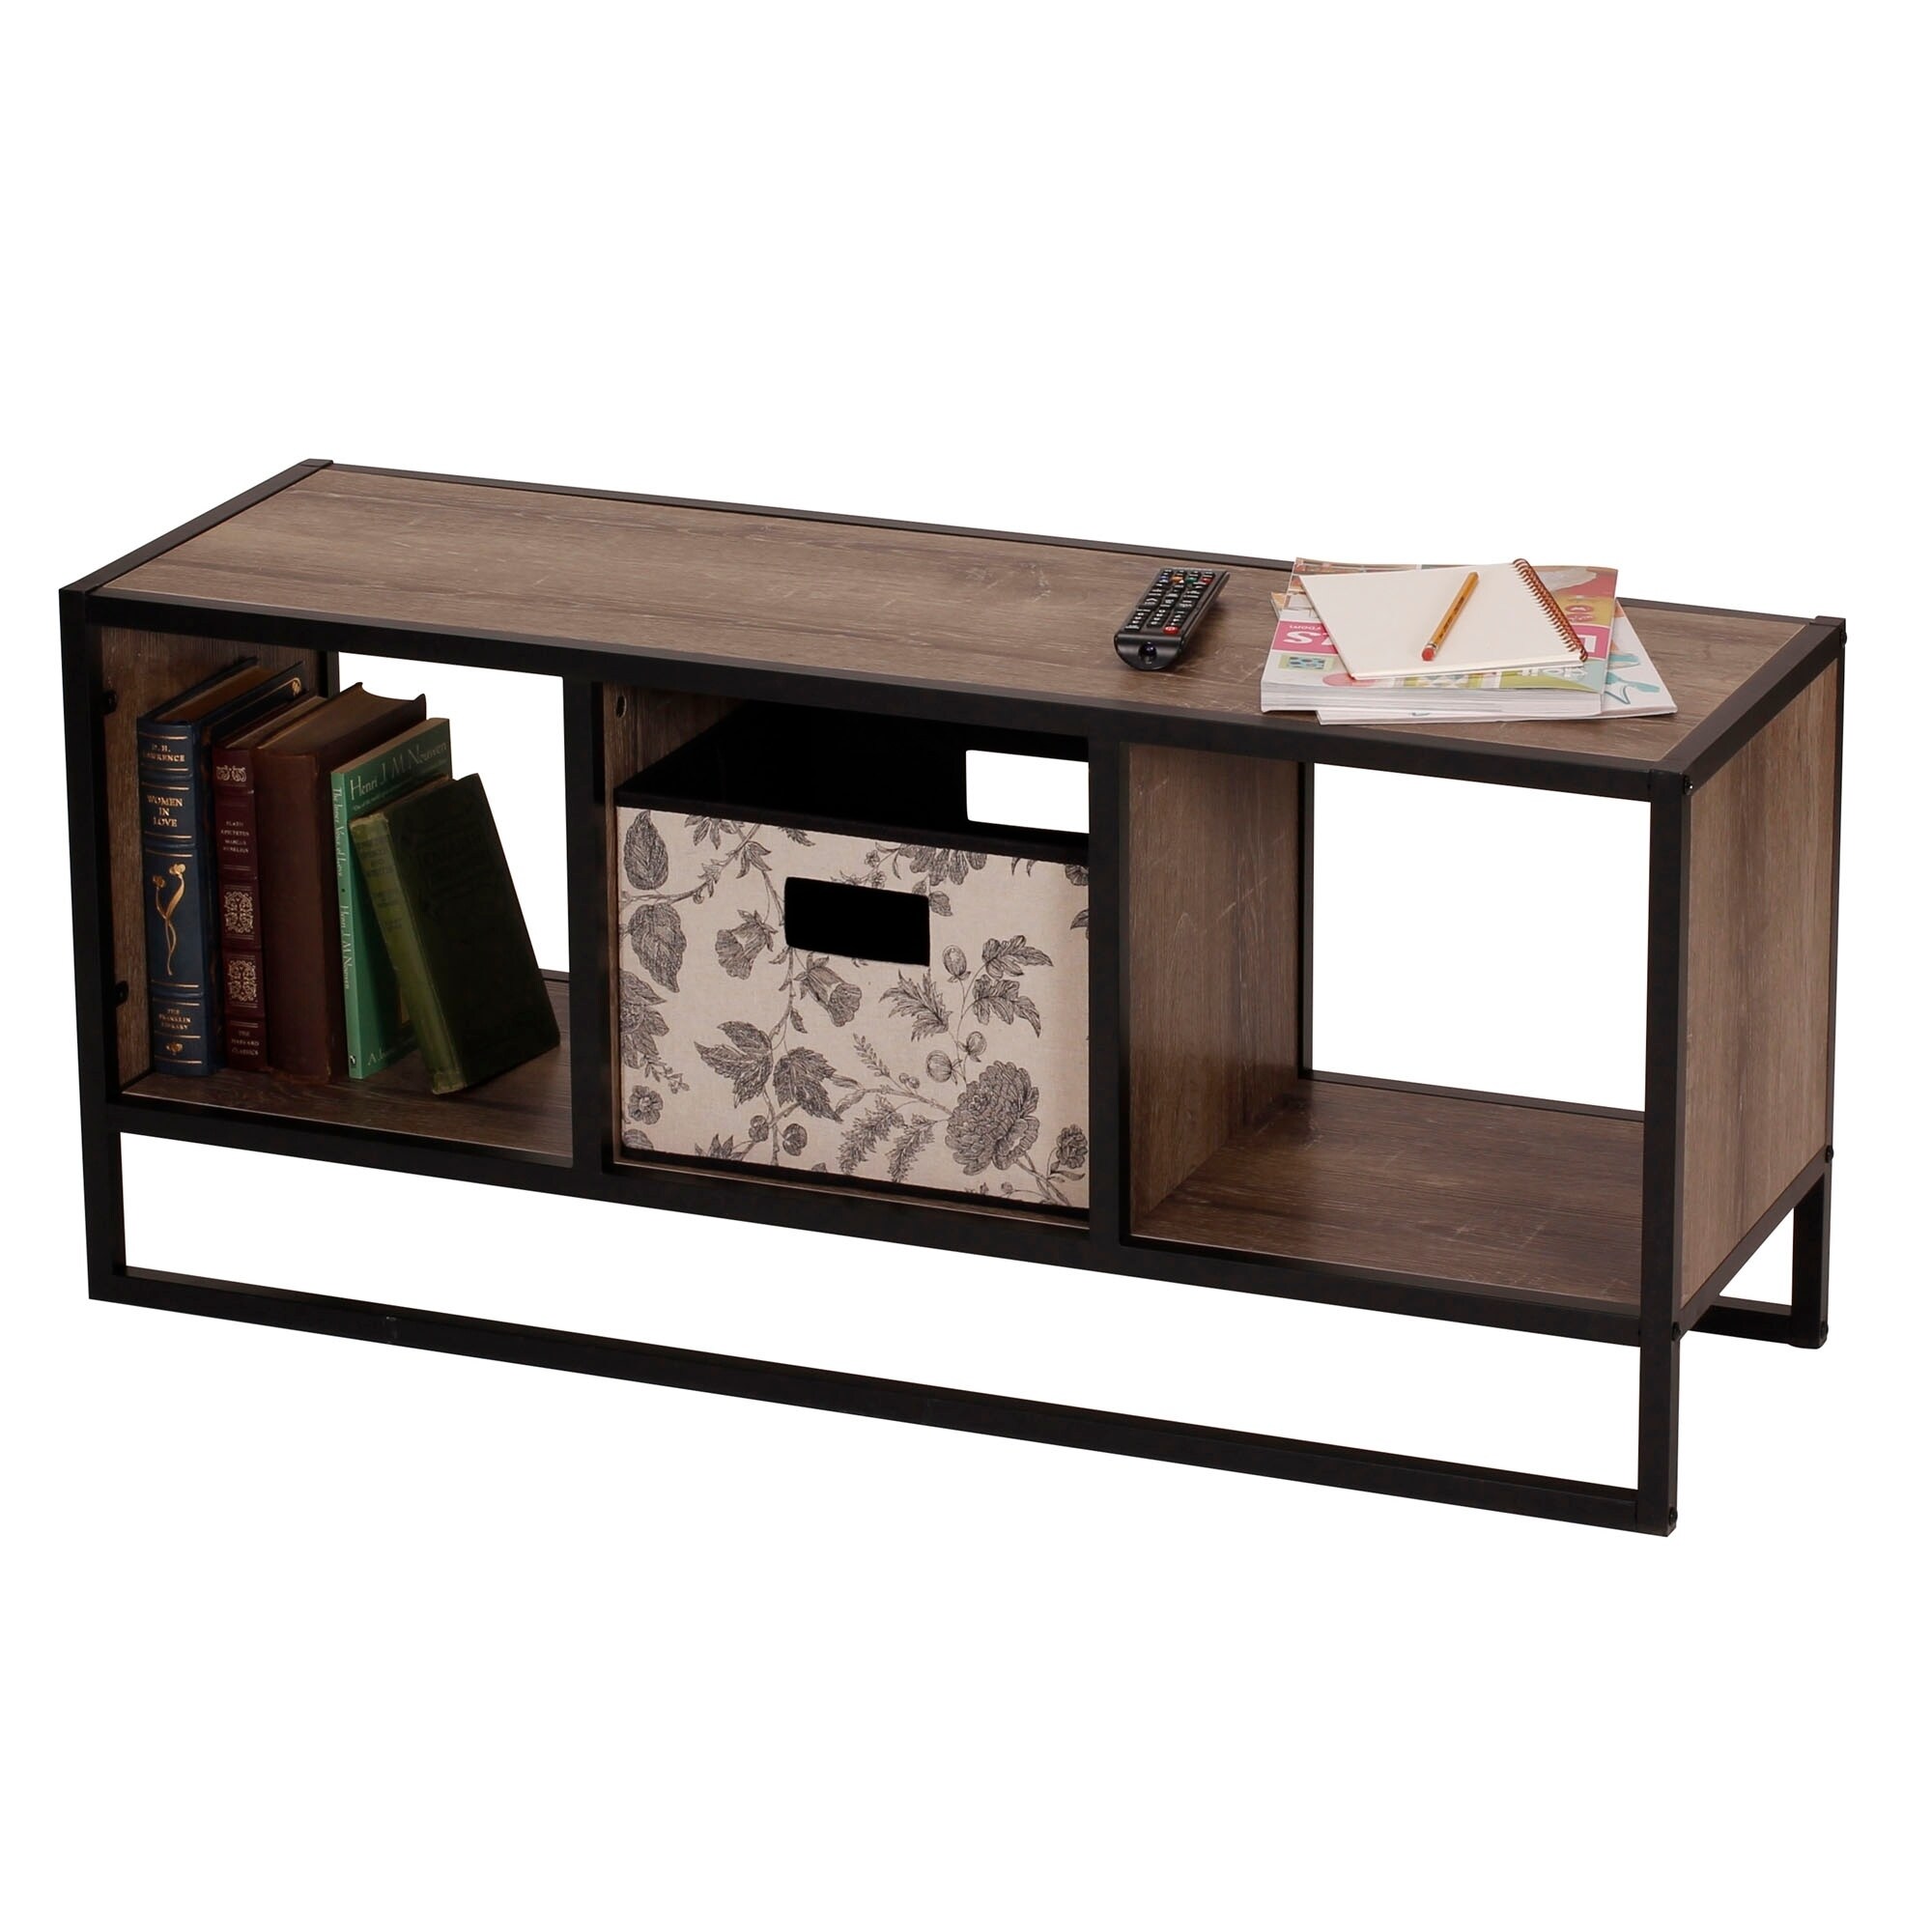 Shop Black Friday Deals On Carbon Loft Woods Ashwood Coffee Table With Storage Shelf Overstock 21490492